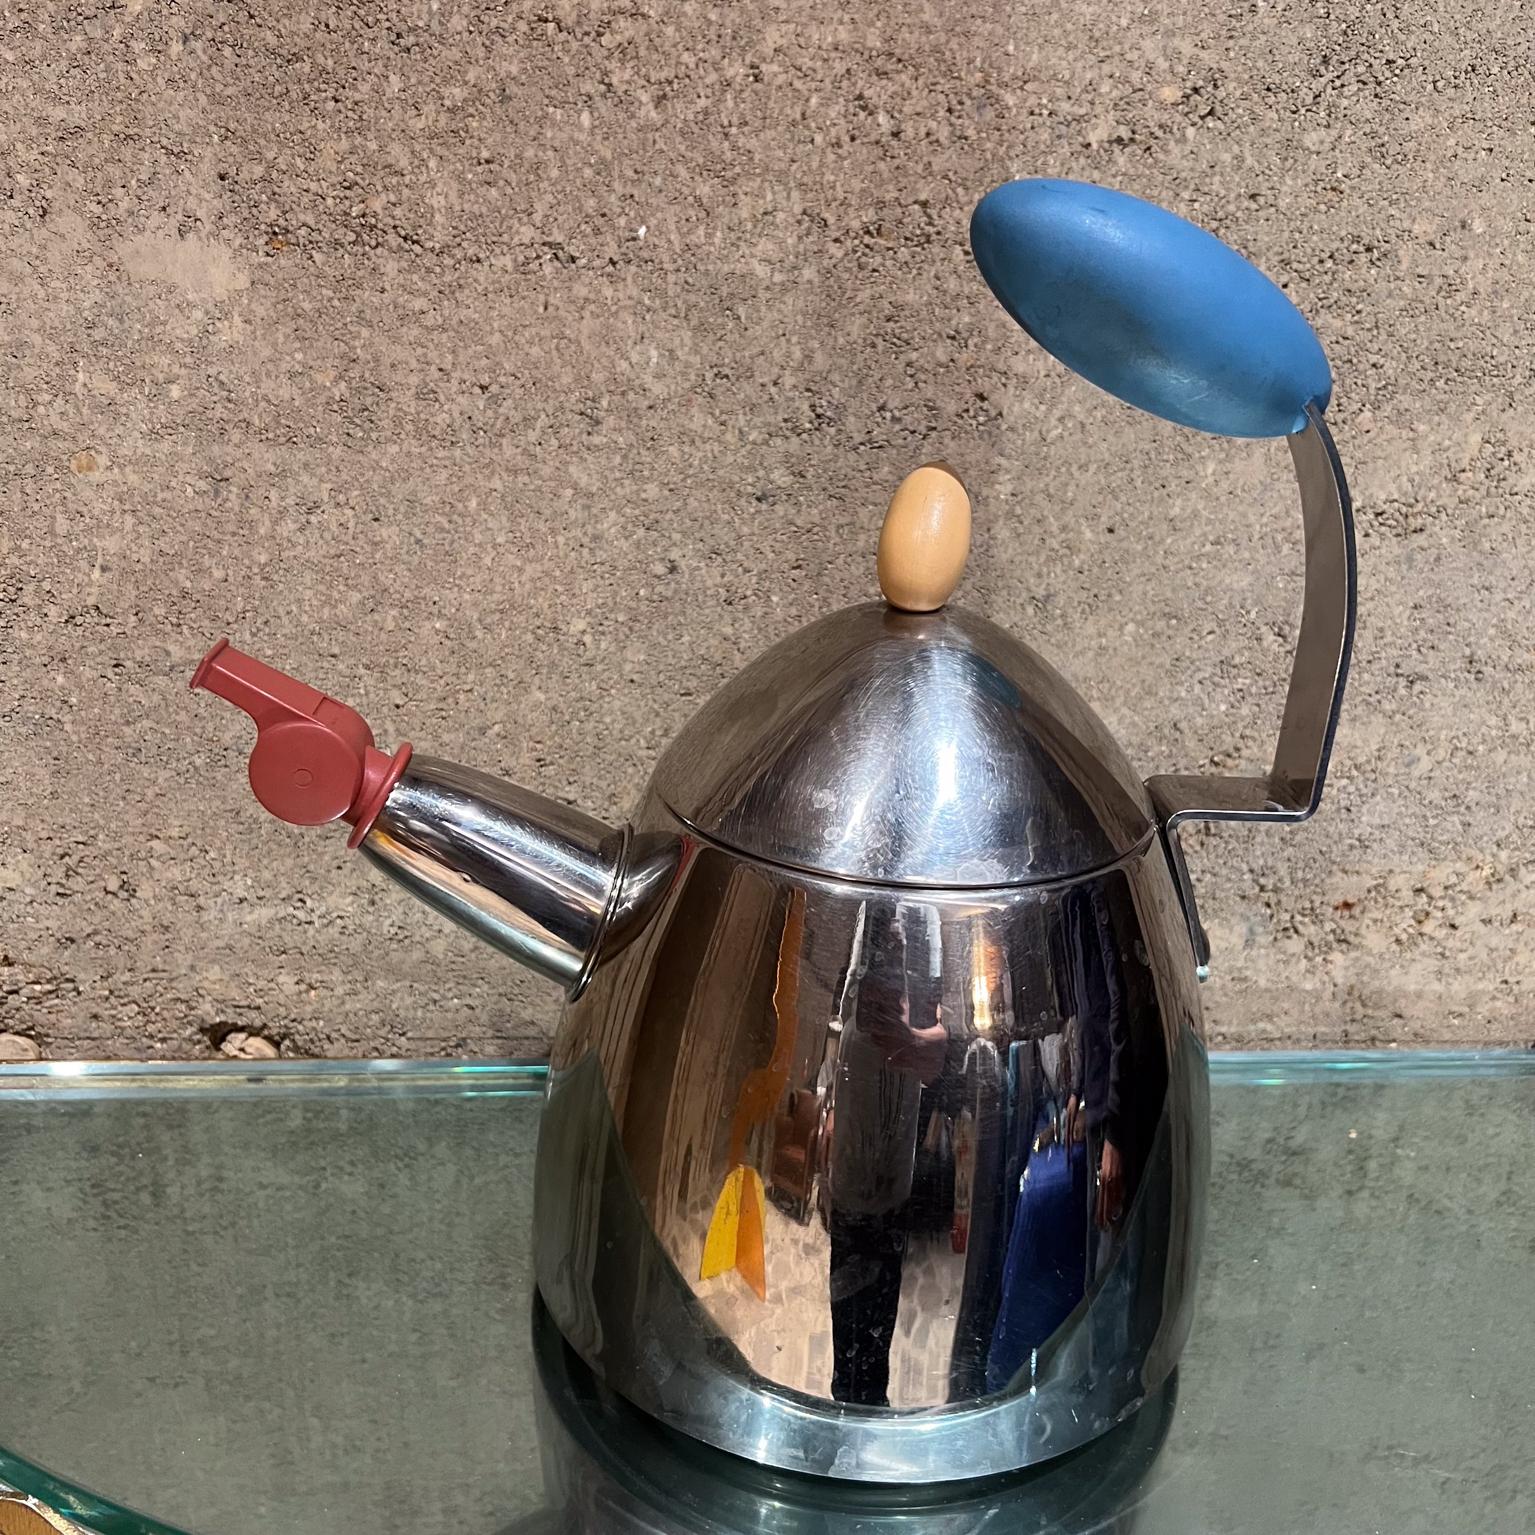 1980s Postmodern Tea Kettle Designed by Michael Graves
With a fun whistle that works when the steam comes out!
12 h x 11.5 long x 7.5 diameter
Preowned unrestored vintage condition. Item is not new.
Refer to all images provided.

